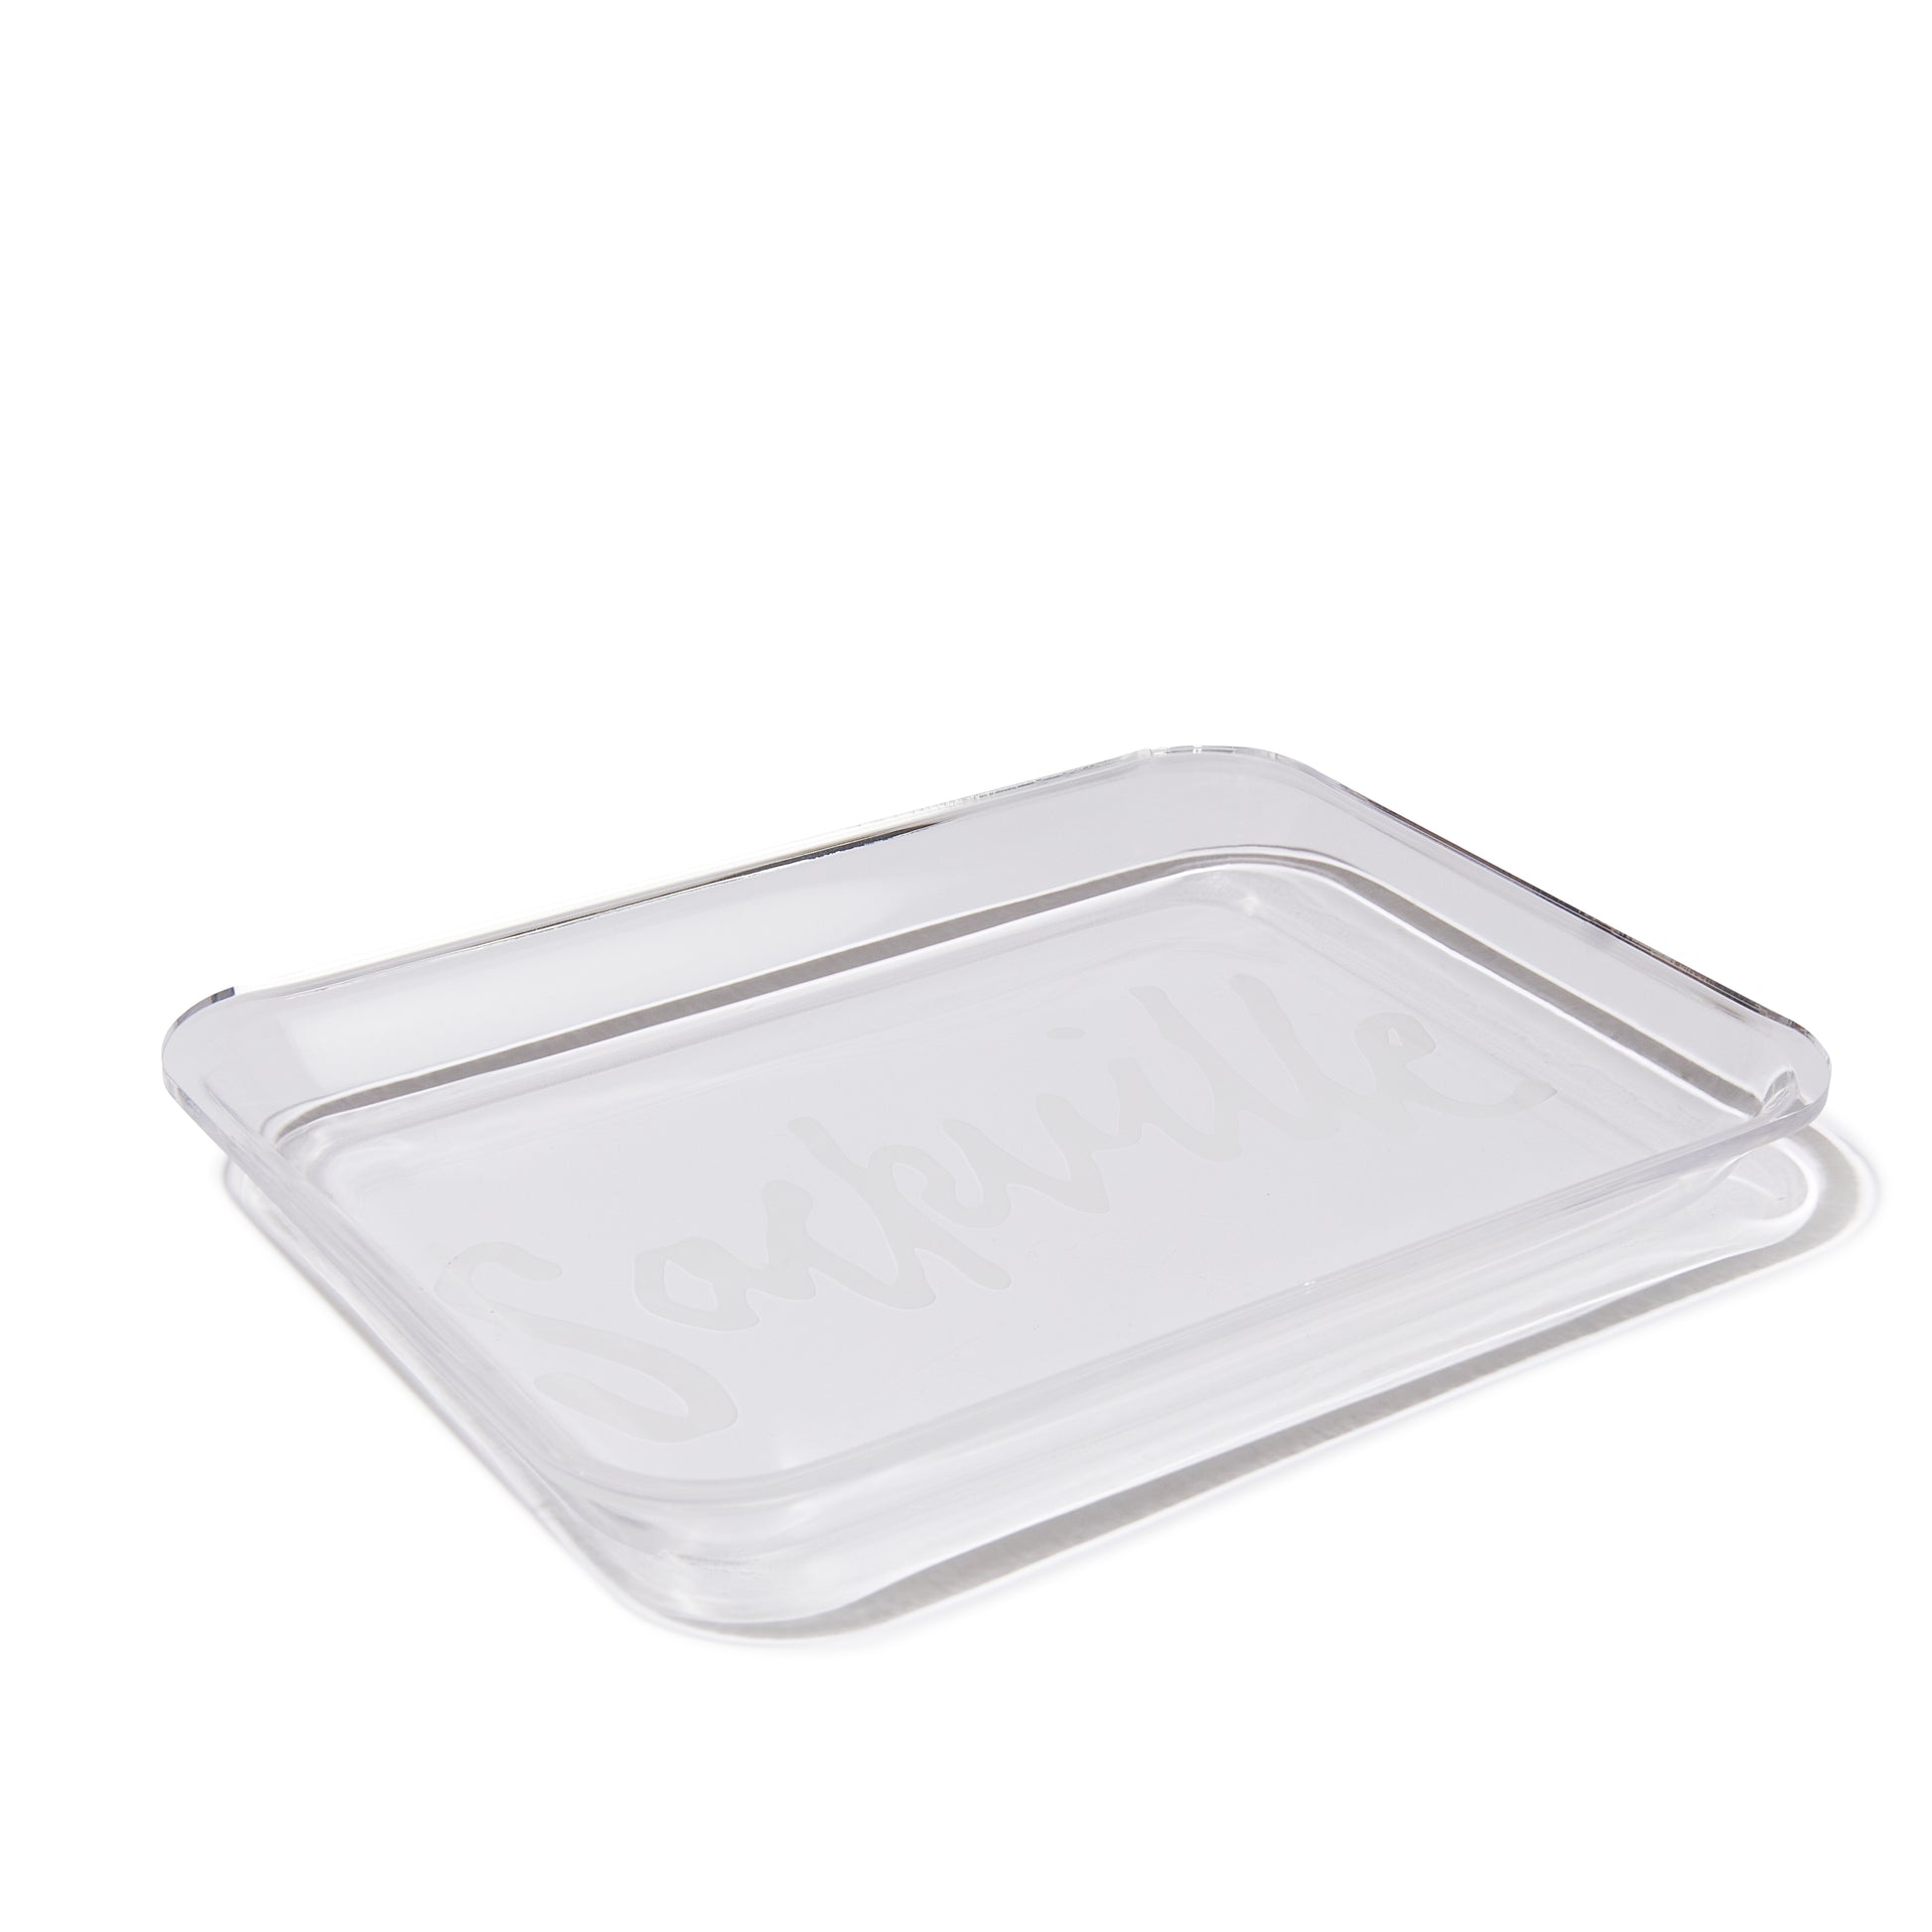 CLEAR GELLY ROLLING TRAY - Sackville & Co.